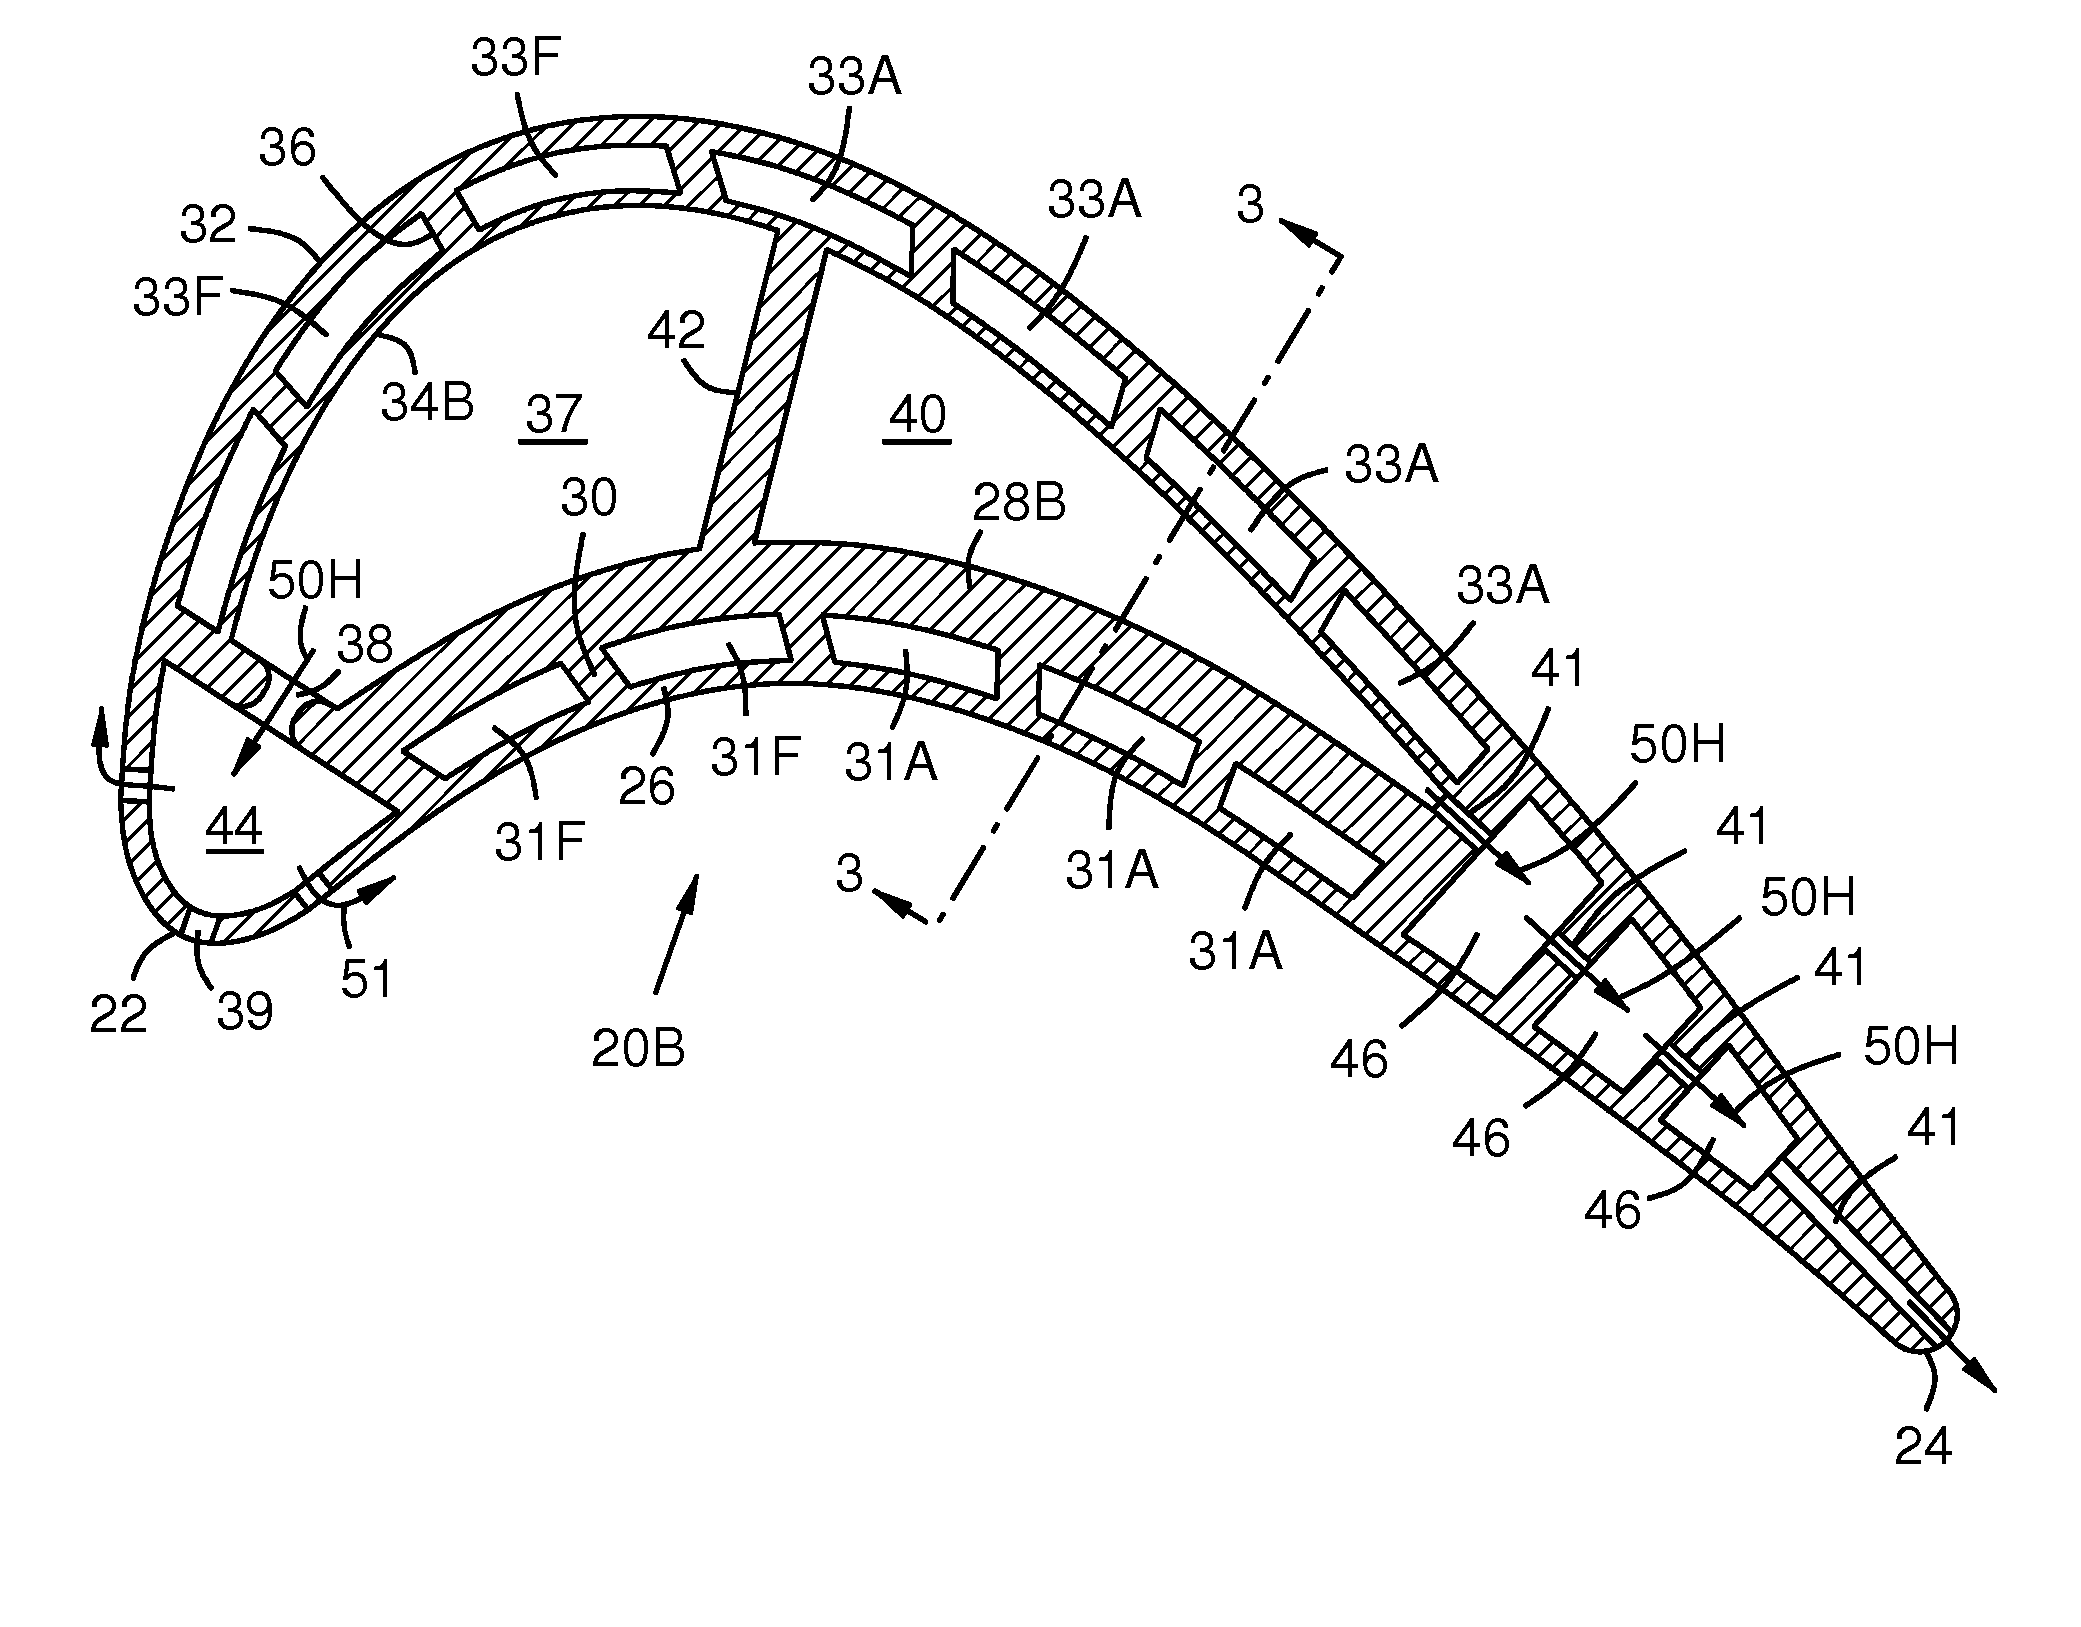 Four-wall turbine airfoil with thermal strain control for reduced cycle fatigue